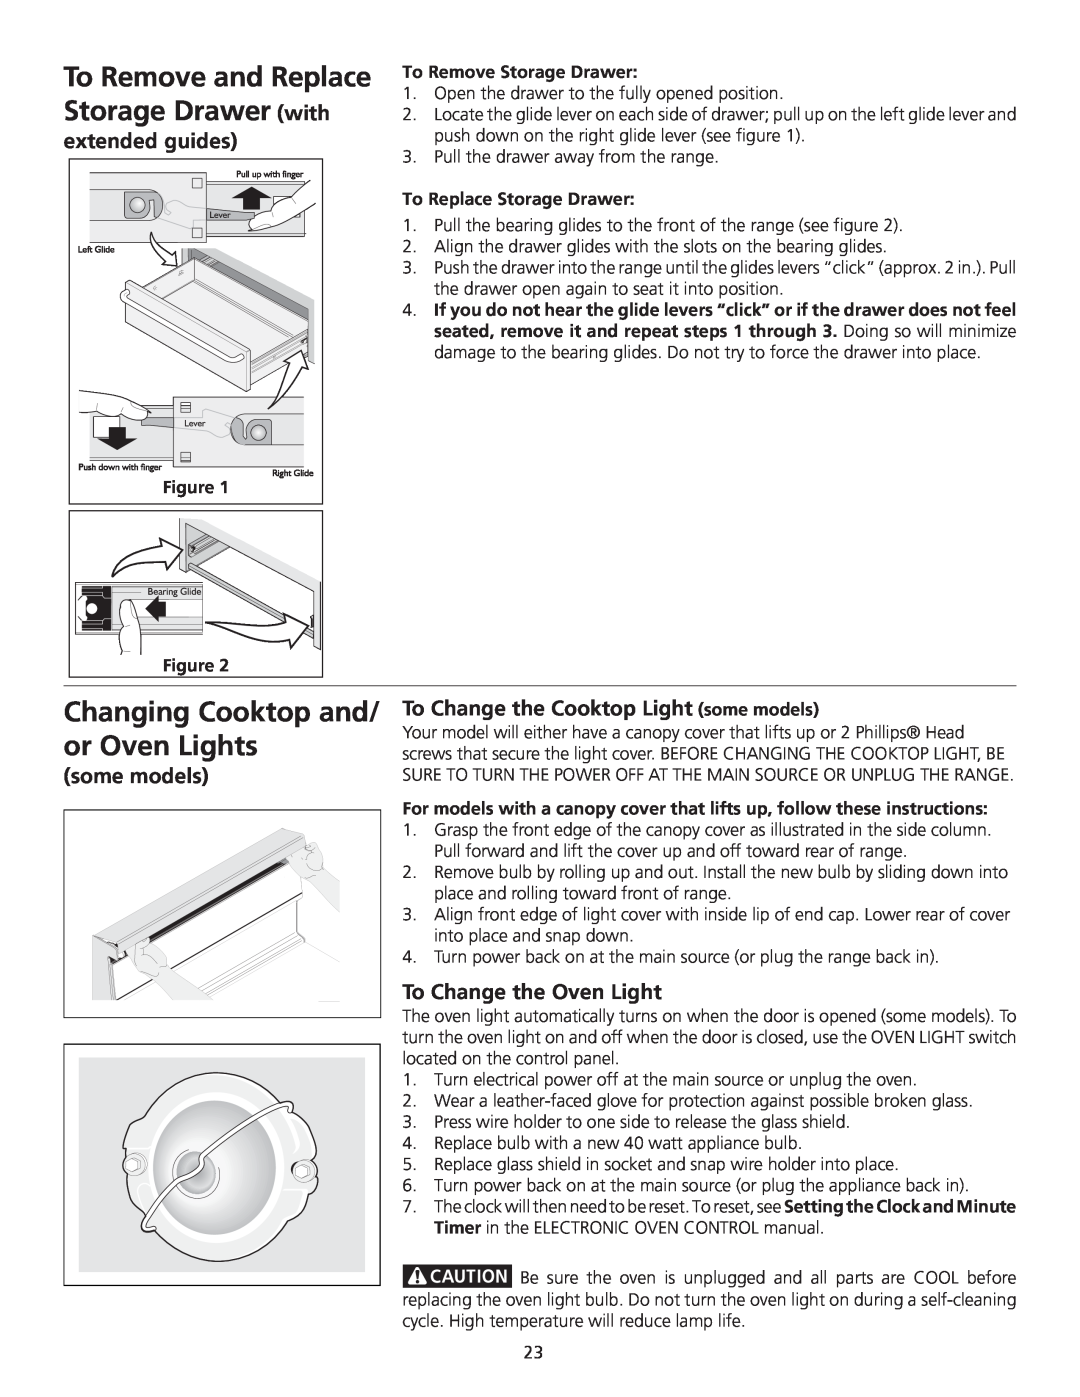 Frigidaire 318200710 Changing Cooktop and/ or Oven Lights, To Remove and Replace Storage Drawer with, extended guides 